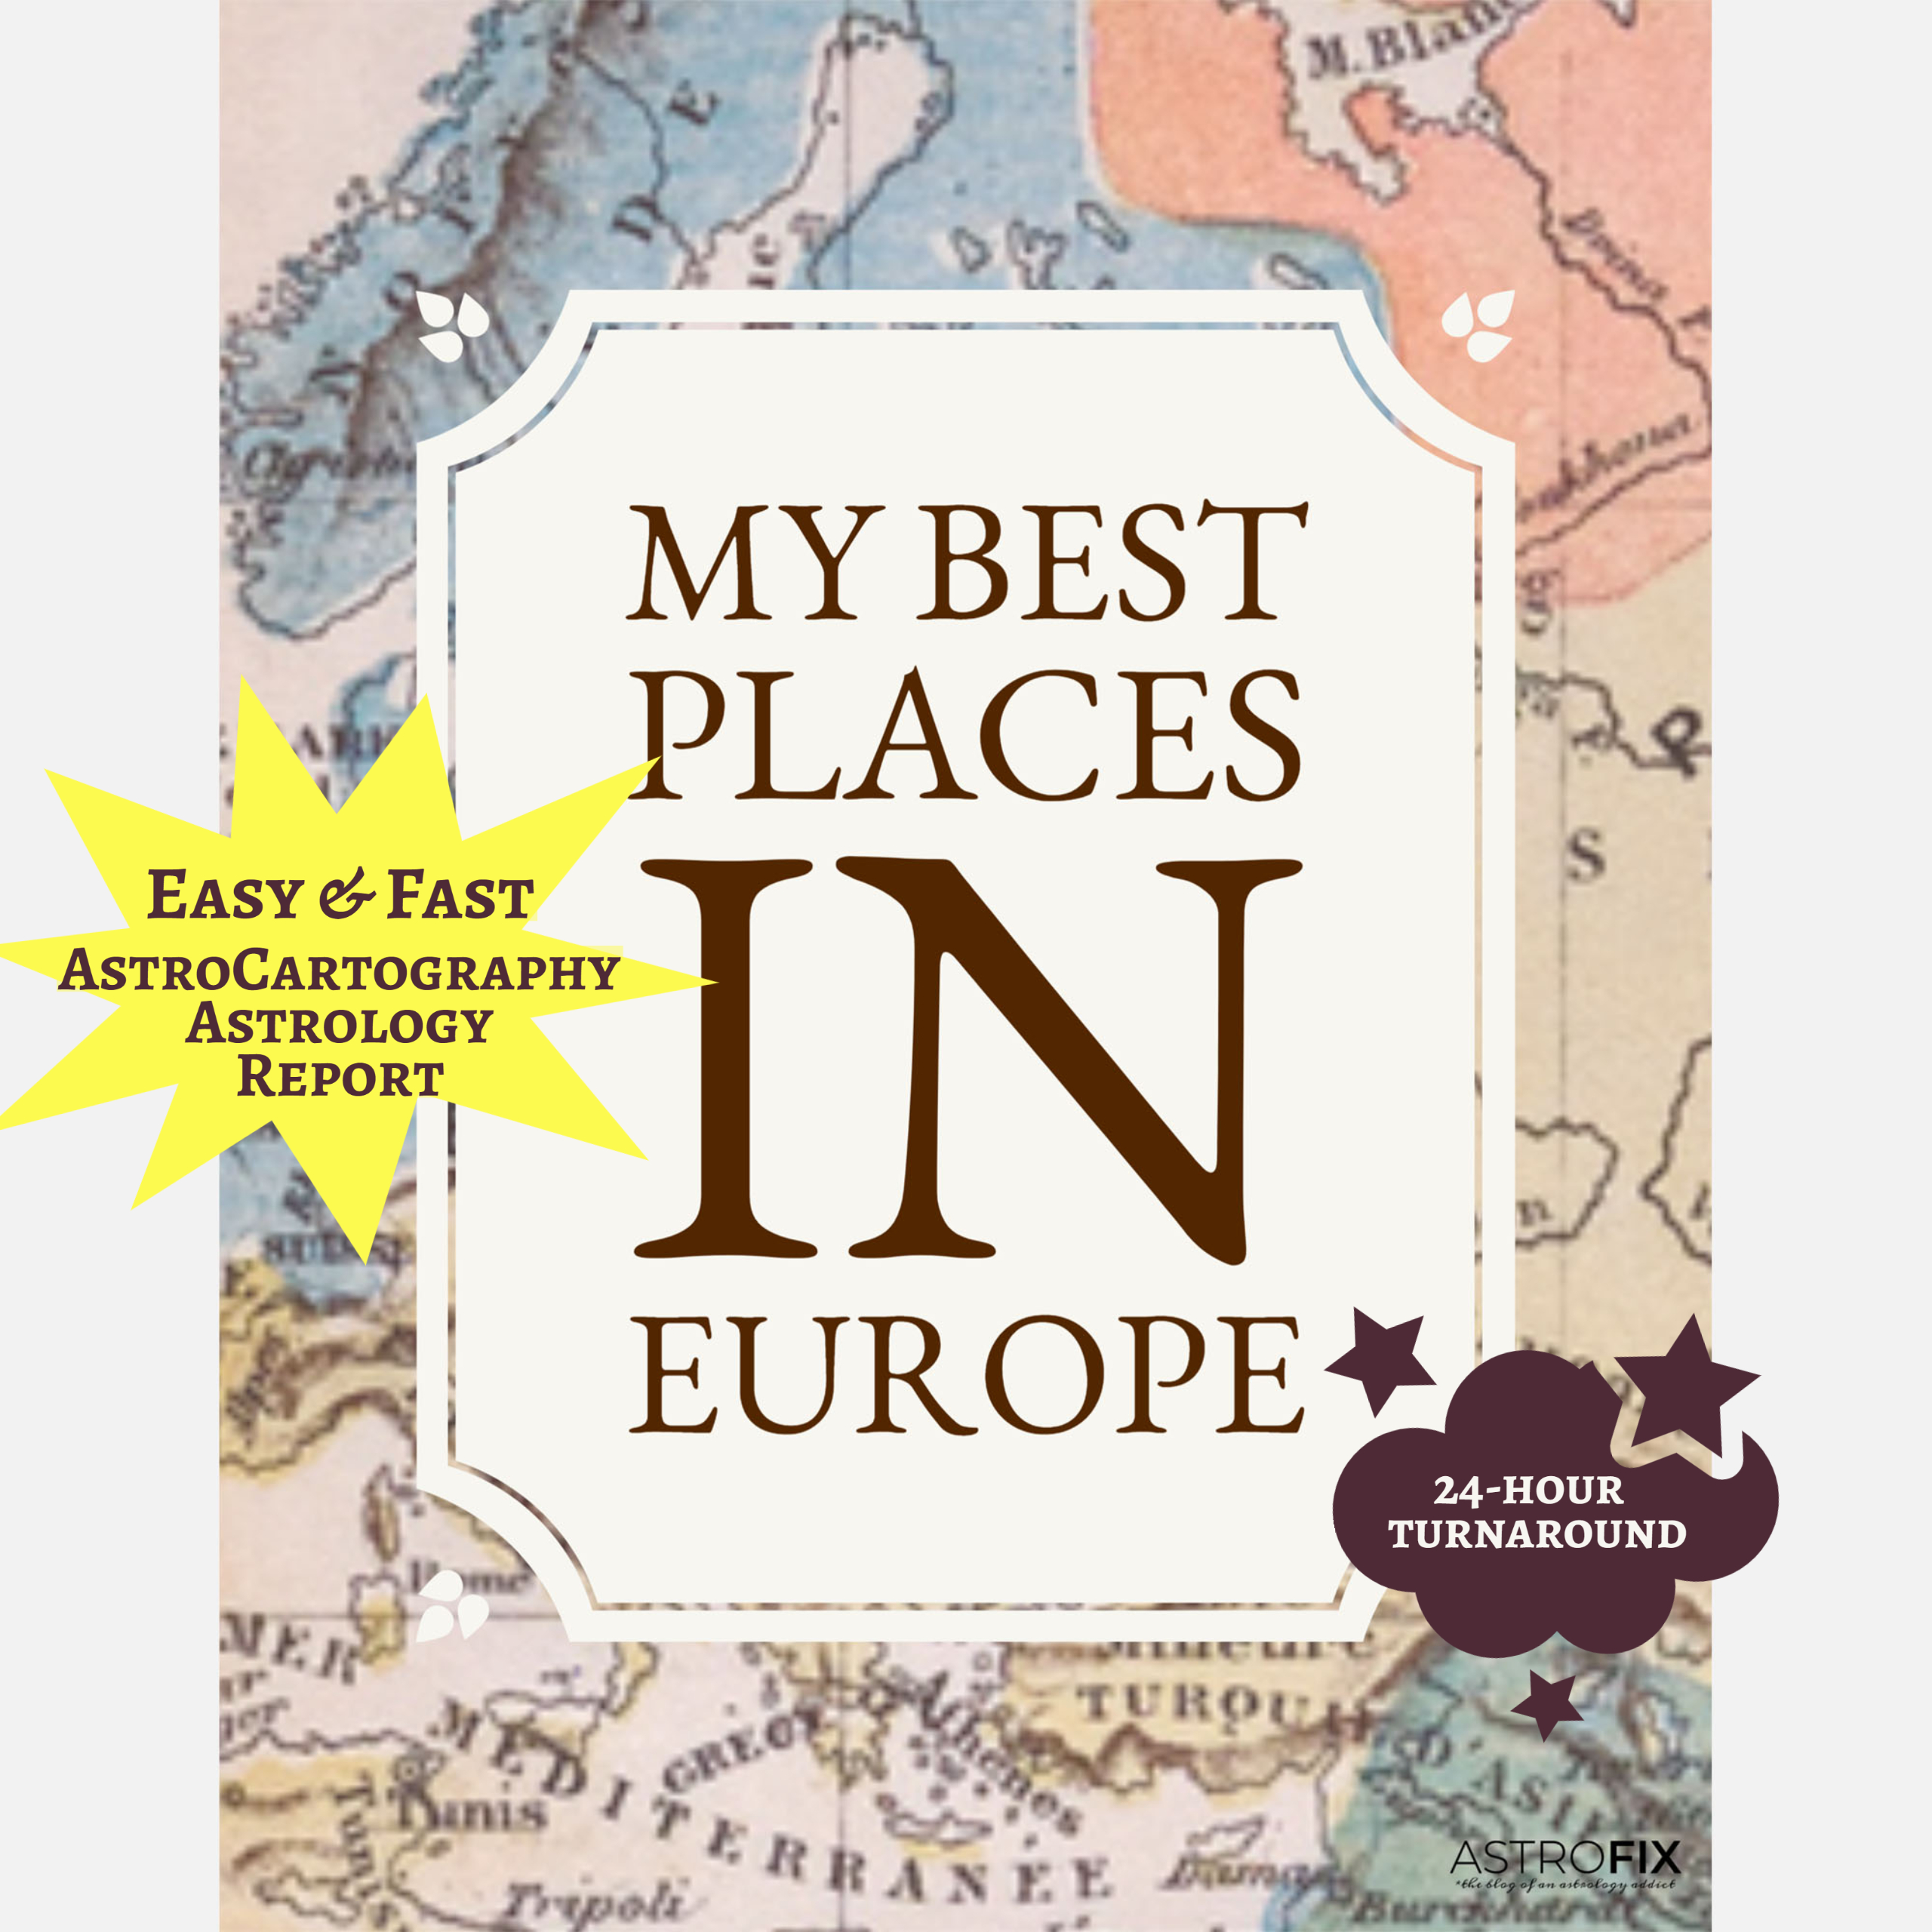 My Best Places in Europe AstroCartography Report,My Best Places in Europe AstroCartography Astrology Report,My Best Places in Europe Relocation Report,Europe AstroCartography Report,astrocartography relocation astrology,astrolocality Europe,relocate